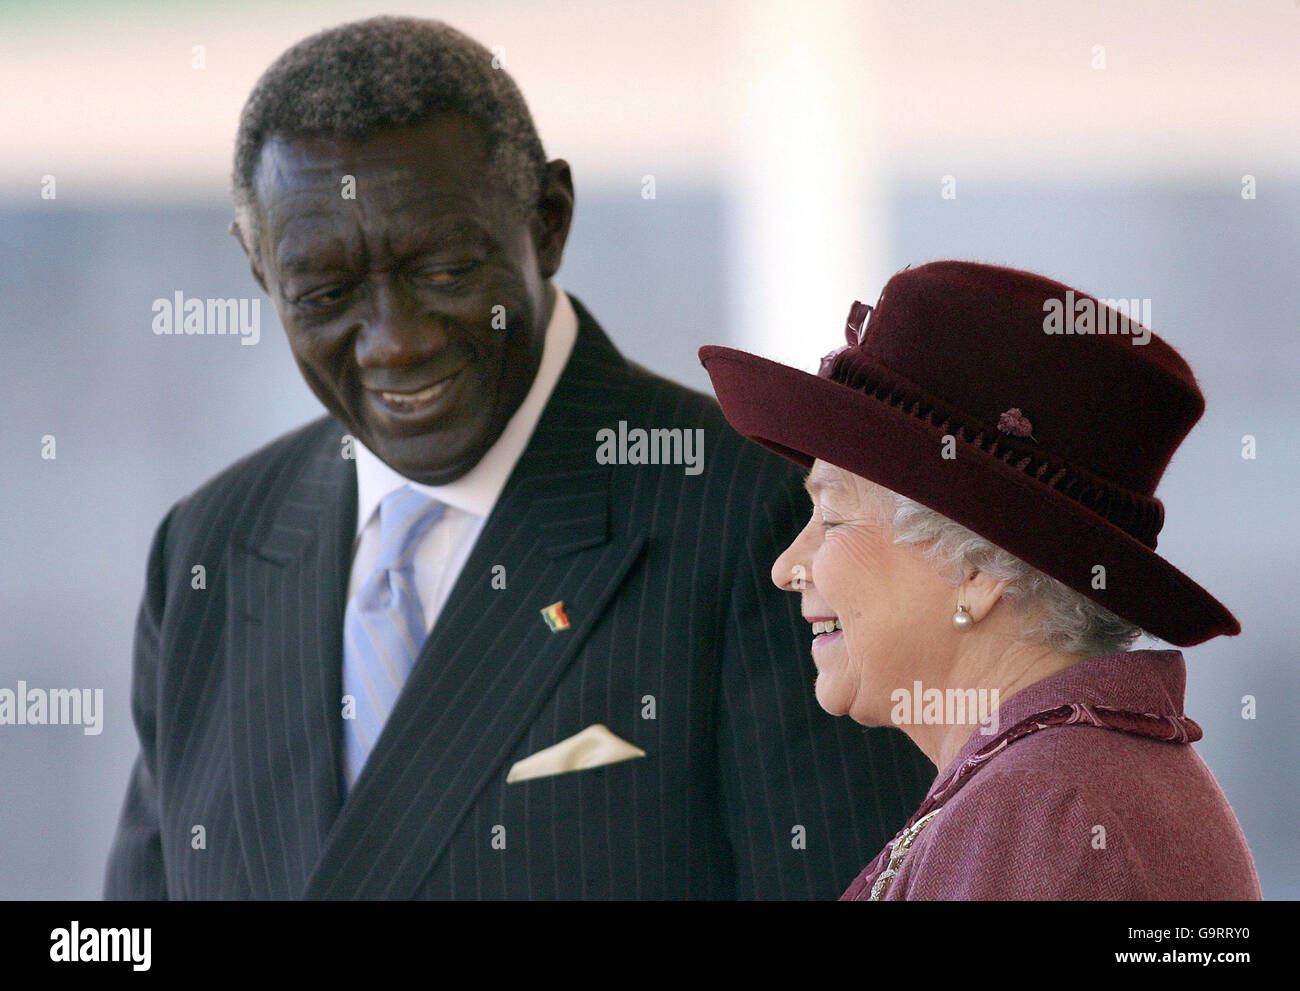 Ghana Facts & History - Queen Elizabeth II and the President of Ghana, John  Agyekum Kufuor, arrive for a State Banquet at Buckingham Palace on March  13, 2007. (Photo by Anwar Hussein